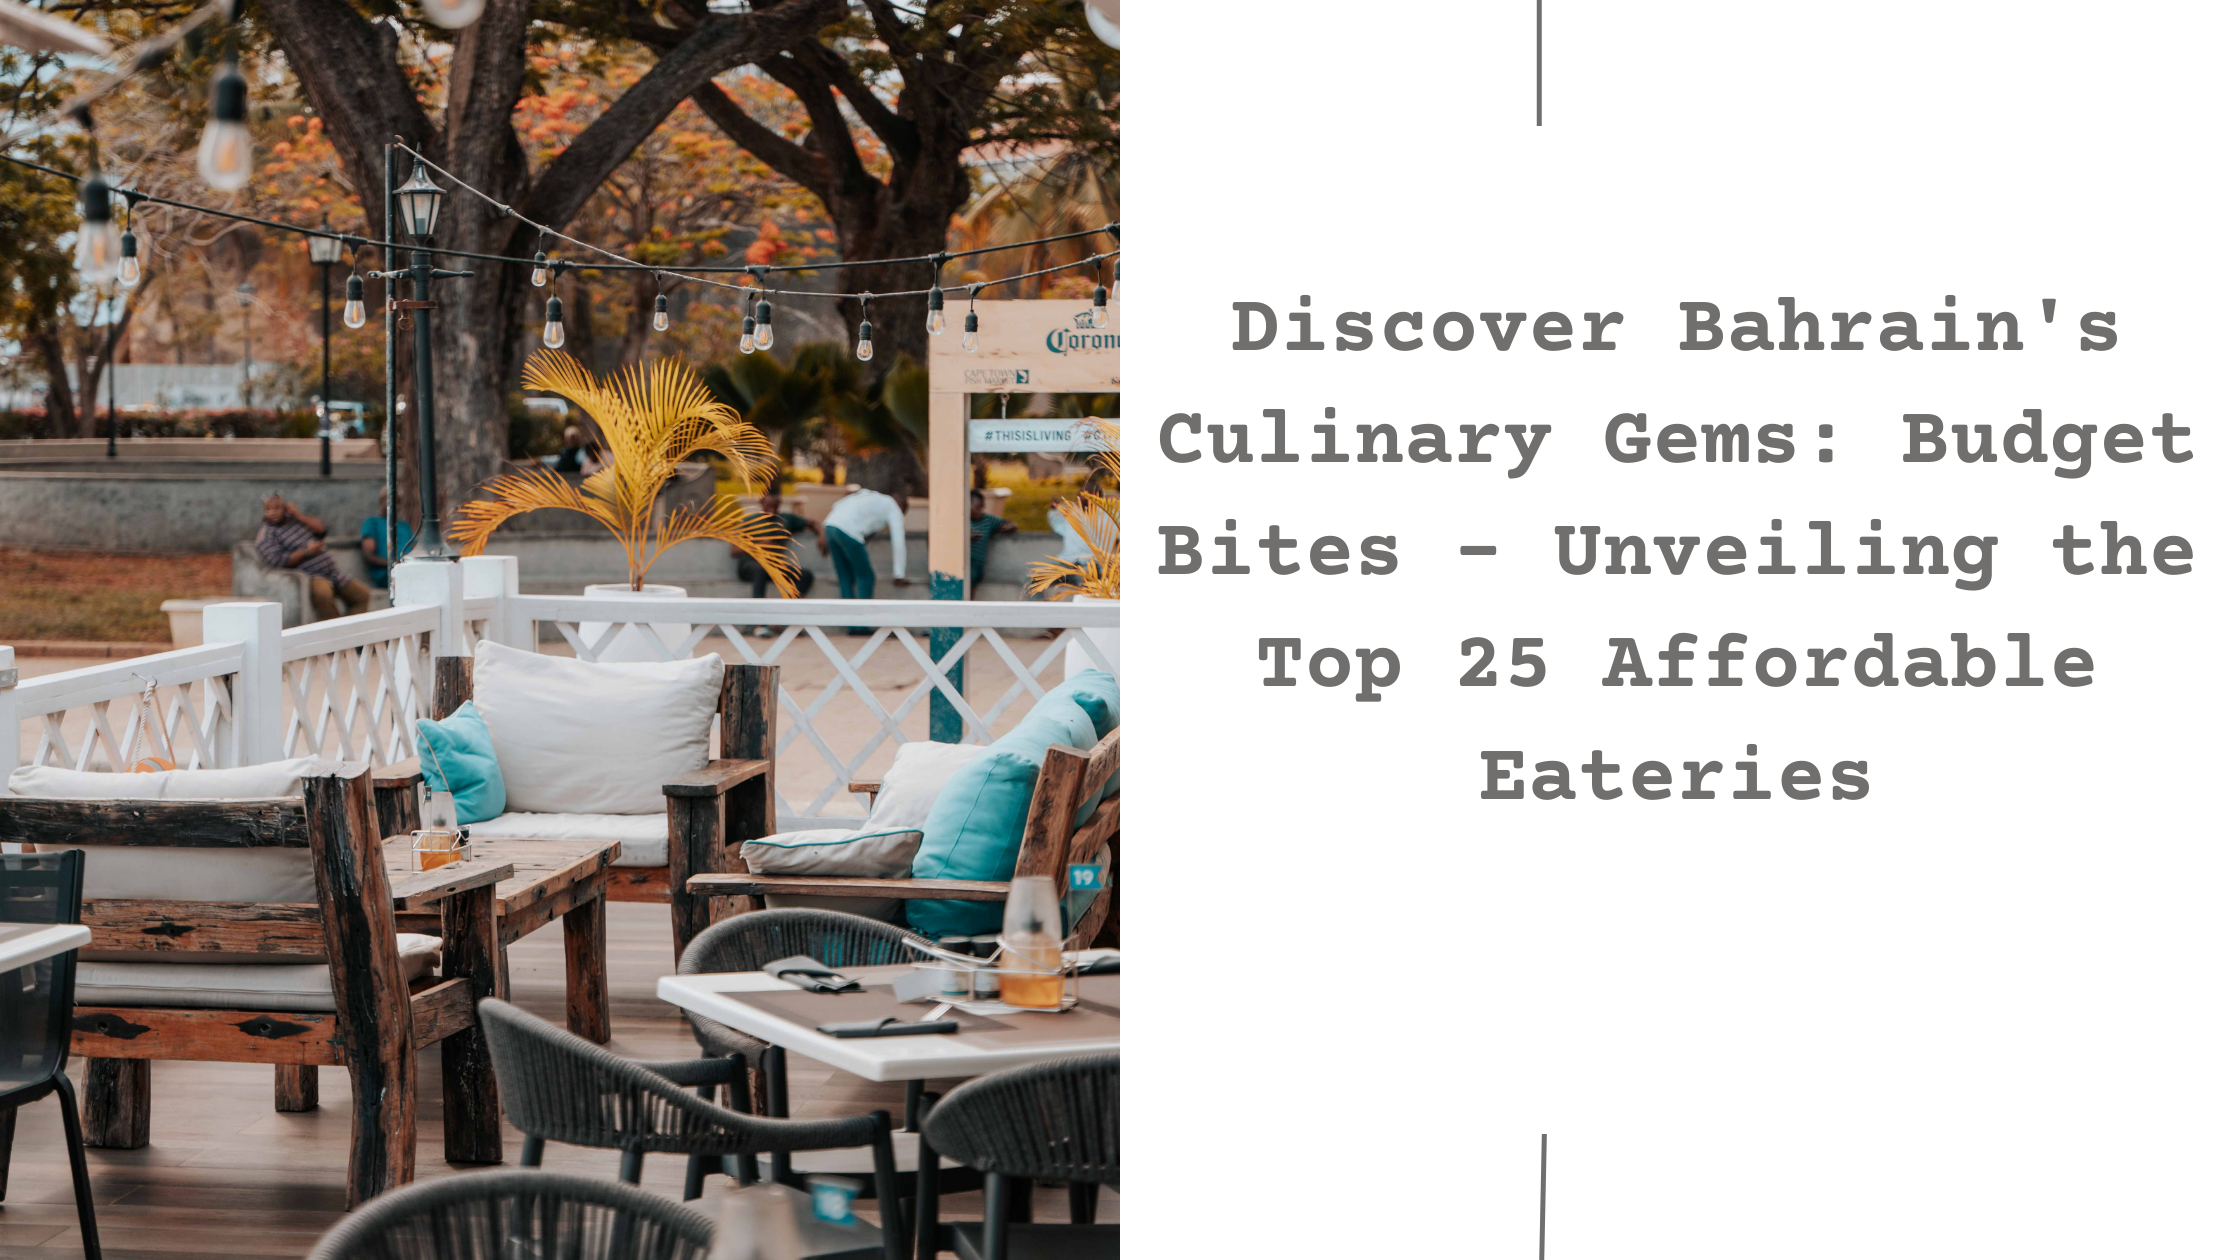 Budget Bites: Top 25 Affordable Eateries in Bahrain